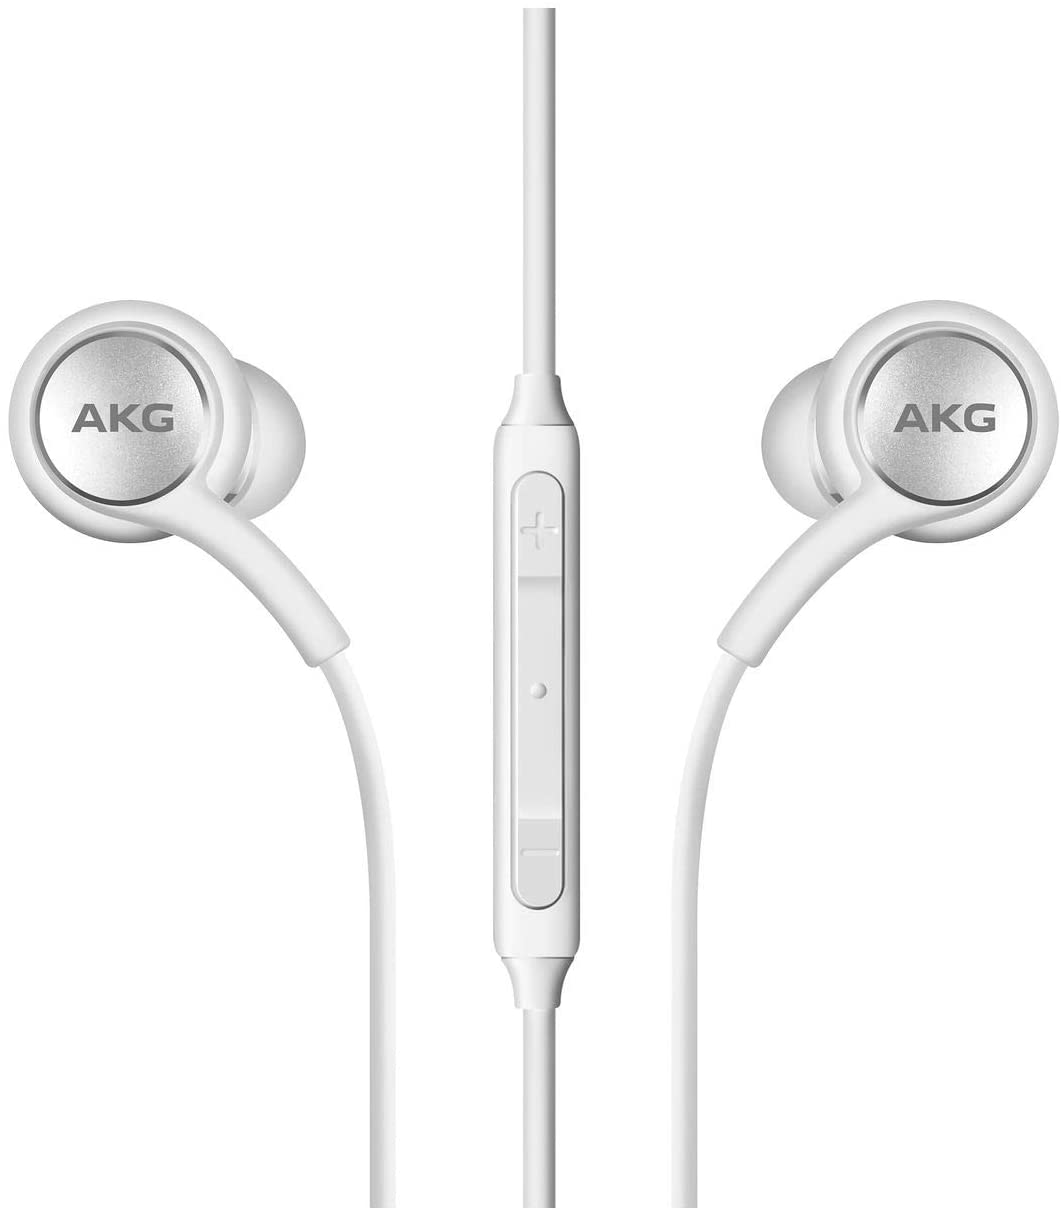 AKG Noise Cancellation For Voice Call Samsung Galaxy S10 Headphones